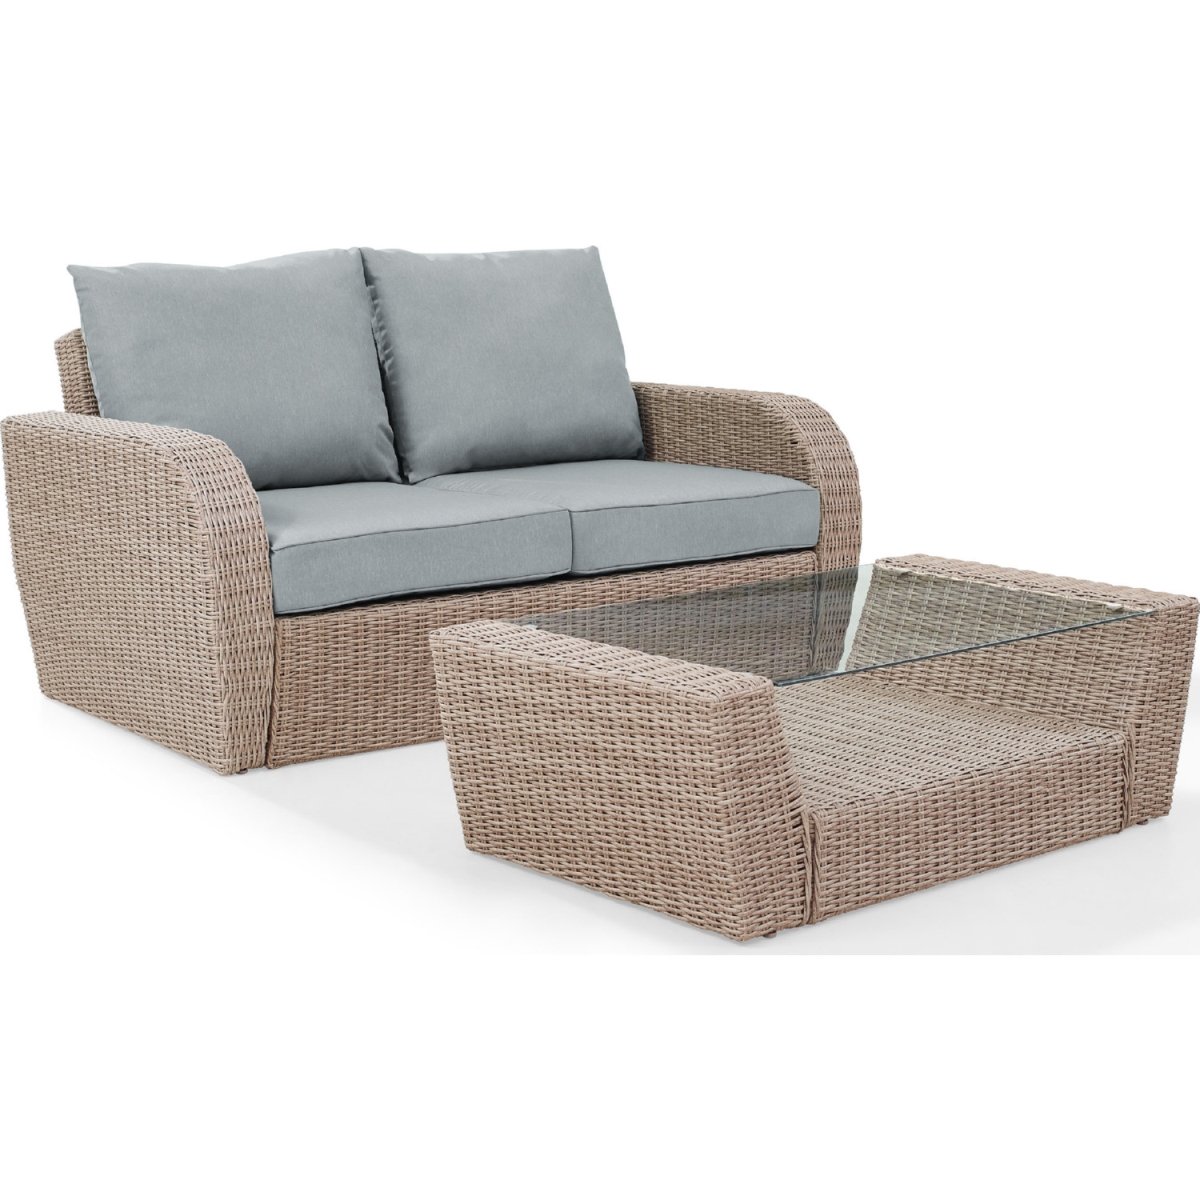 Ko70133wh-mi 2 Piece St. Augustine Outdoor Wicker Seating Set With Mist Cushion - Loveseat, Coffee Table